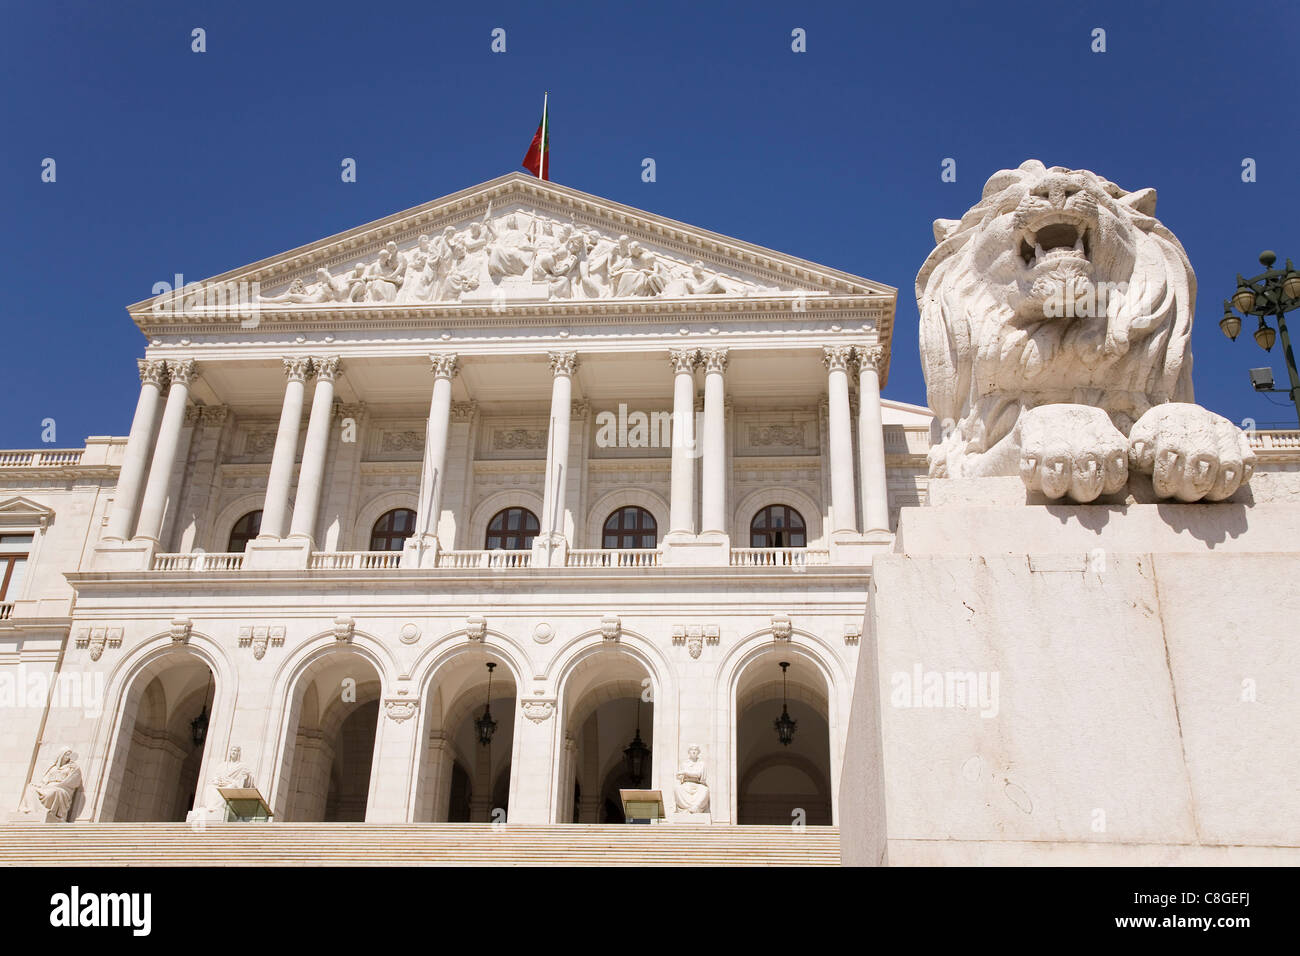 A lion statue guards the Palace of Sao Bento, built in 1834, the seat of the Portuguese Parliament, in Lisbon, Portugal Stock Photo